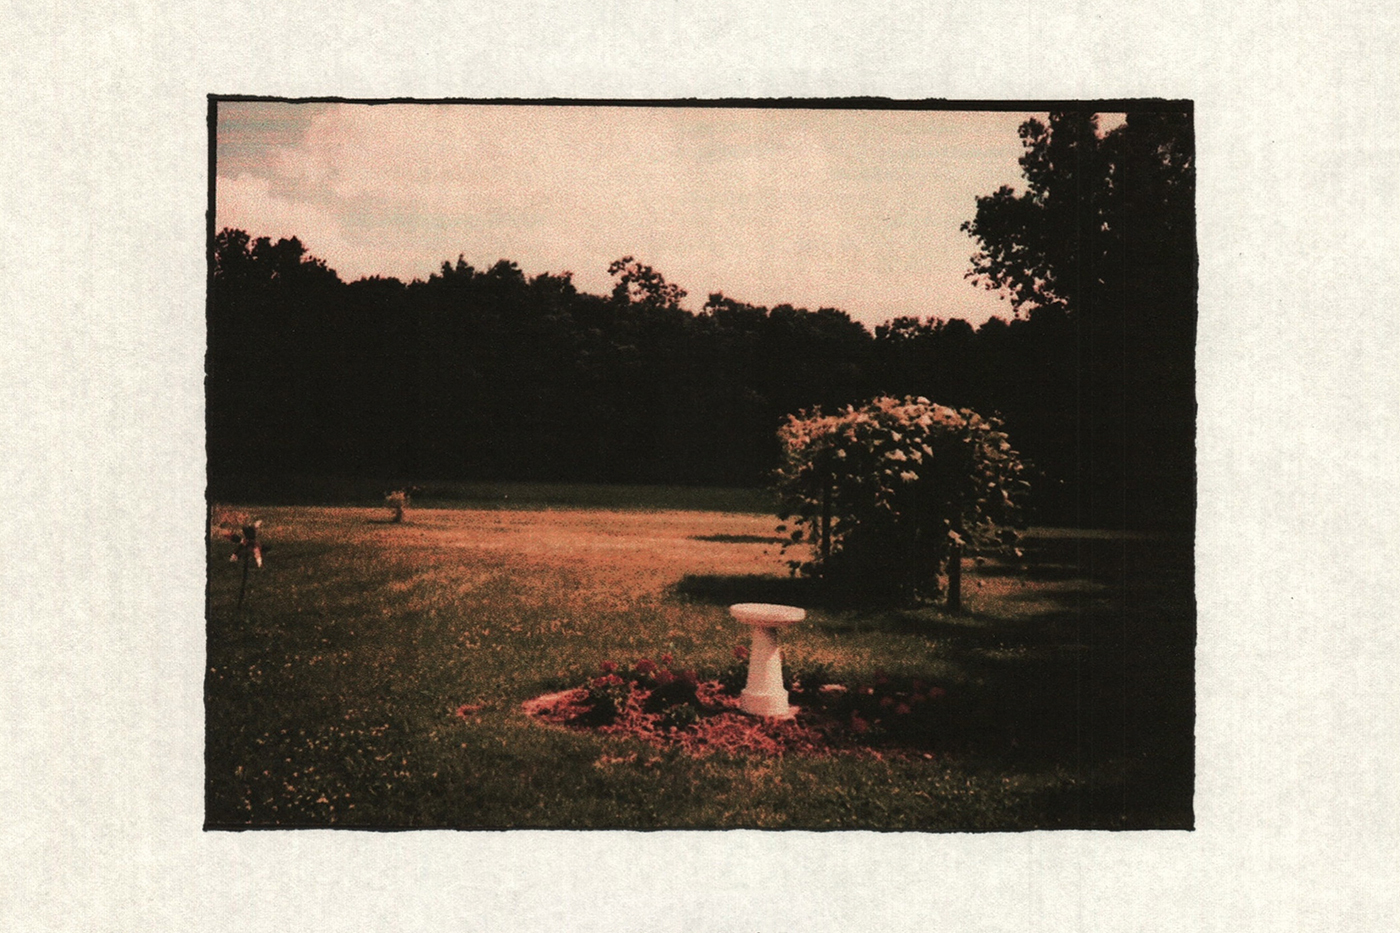 Danny Clay - Ganymede, old photo of a garden in spring or summer